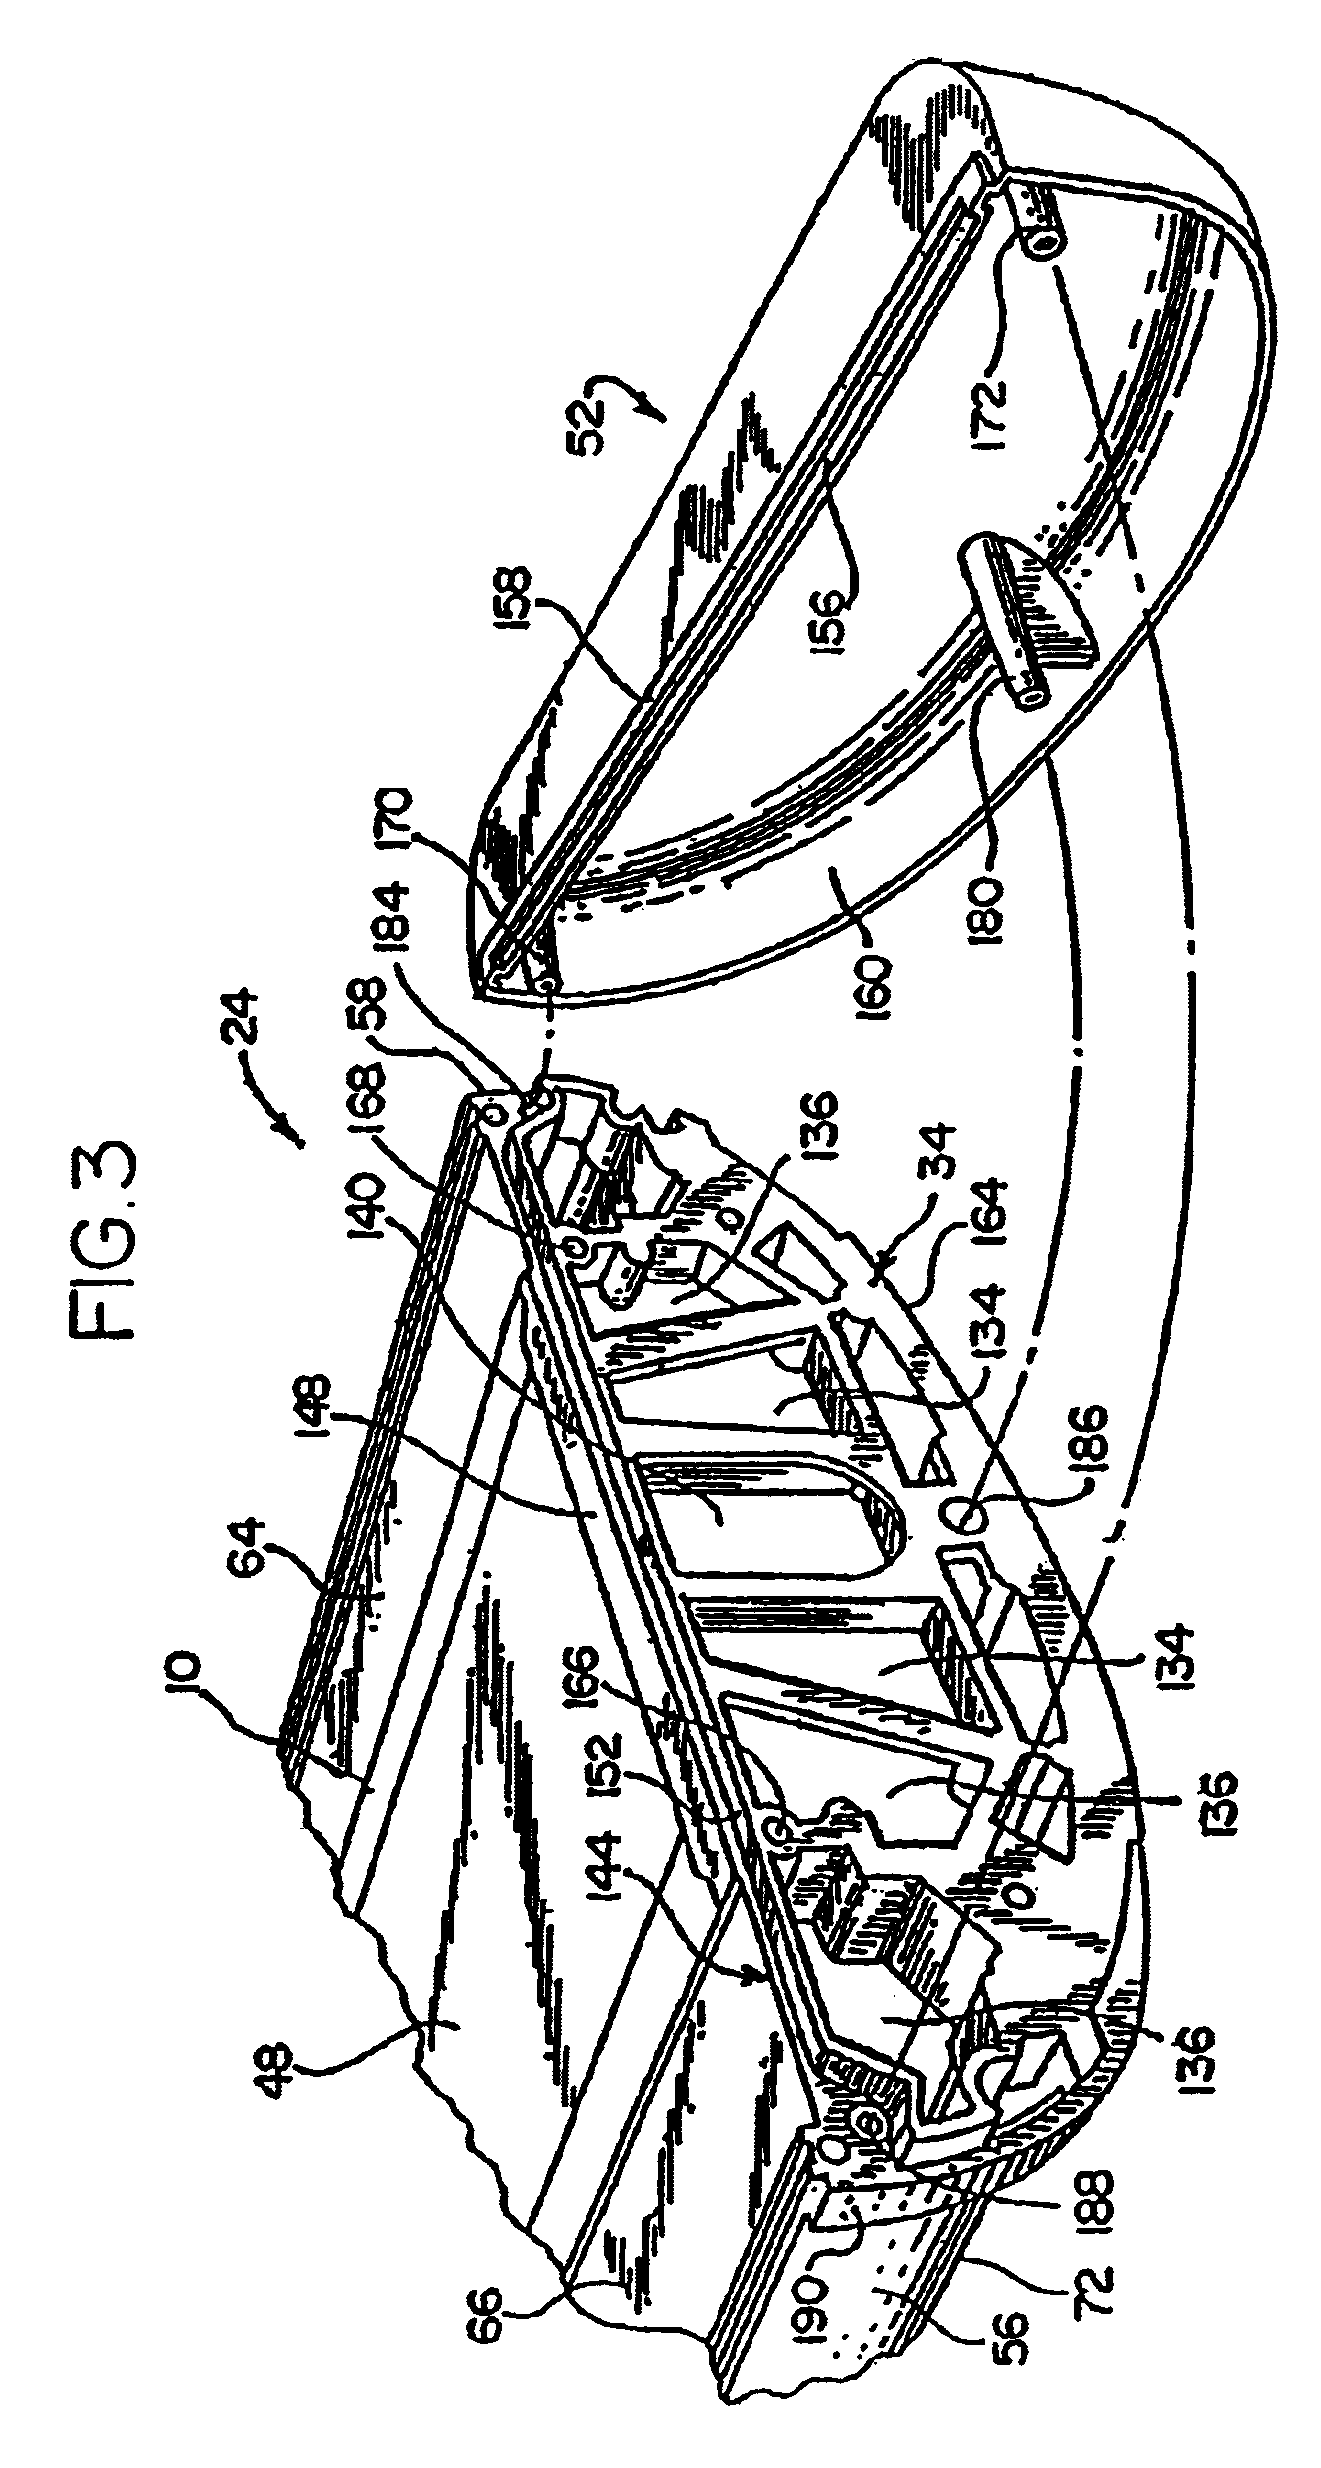 Selectively-extendable modular lighting fixture and method